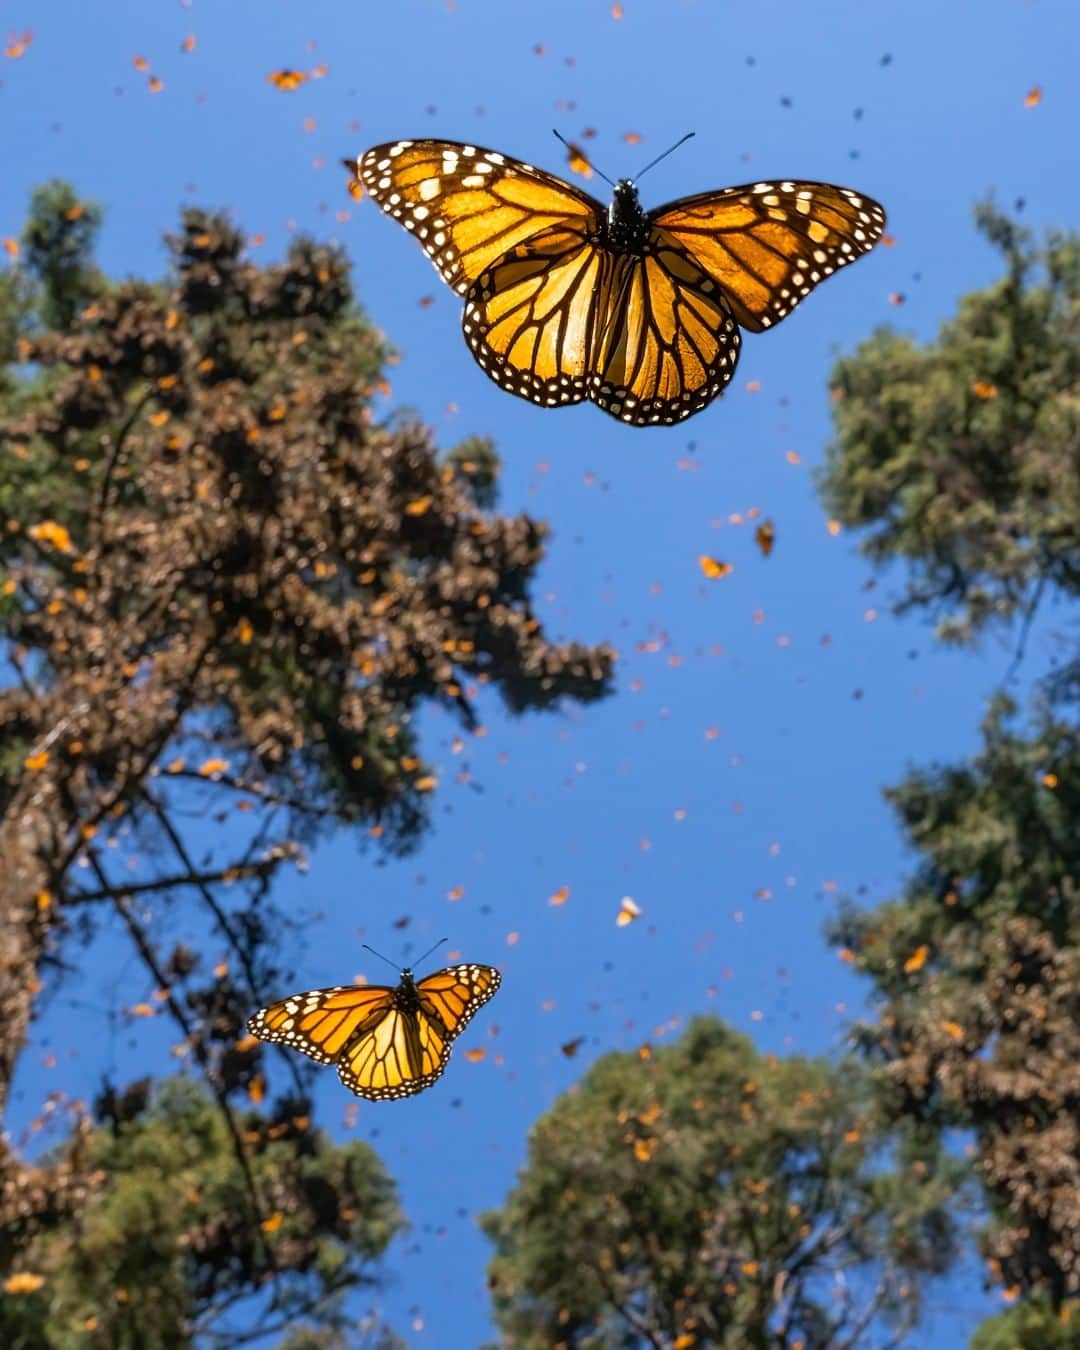 National Geographic Creativeのインスタグラム：「Photos by @jaimerojo | The Monarch Butterflies are migrating north, and a new cycle begins. It will take up to four generations of these amazing insects to complete the trip back to Central Mexico. As I wrap up my assignment for @natgeo and @insidenatgeo, I reflect on the wonderful days in the field following this remarkable migration from Ontario to Michoacán.  This project wouldn’t have been the same without the company and support of the assistants who joined me during my travels—all of whom are accomplished storytellers in their own right. (Photo 2 @thor_morales) (Photo 3 @isabetabug) (Photo 4 @ganesh.marin) (Photo 5 @markus.burman) (Photo 6 @luis.antonio.rojas)  Spending time in the field with other photographers was a great learning experience in the early steps of my career. I hope I've been able to share back some of what makes our job one of the best in the world.」